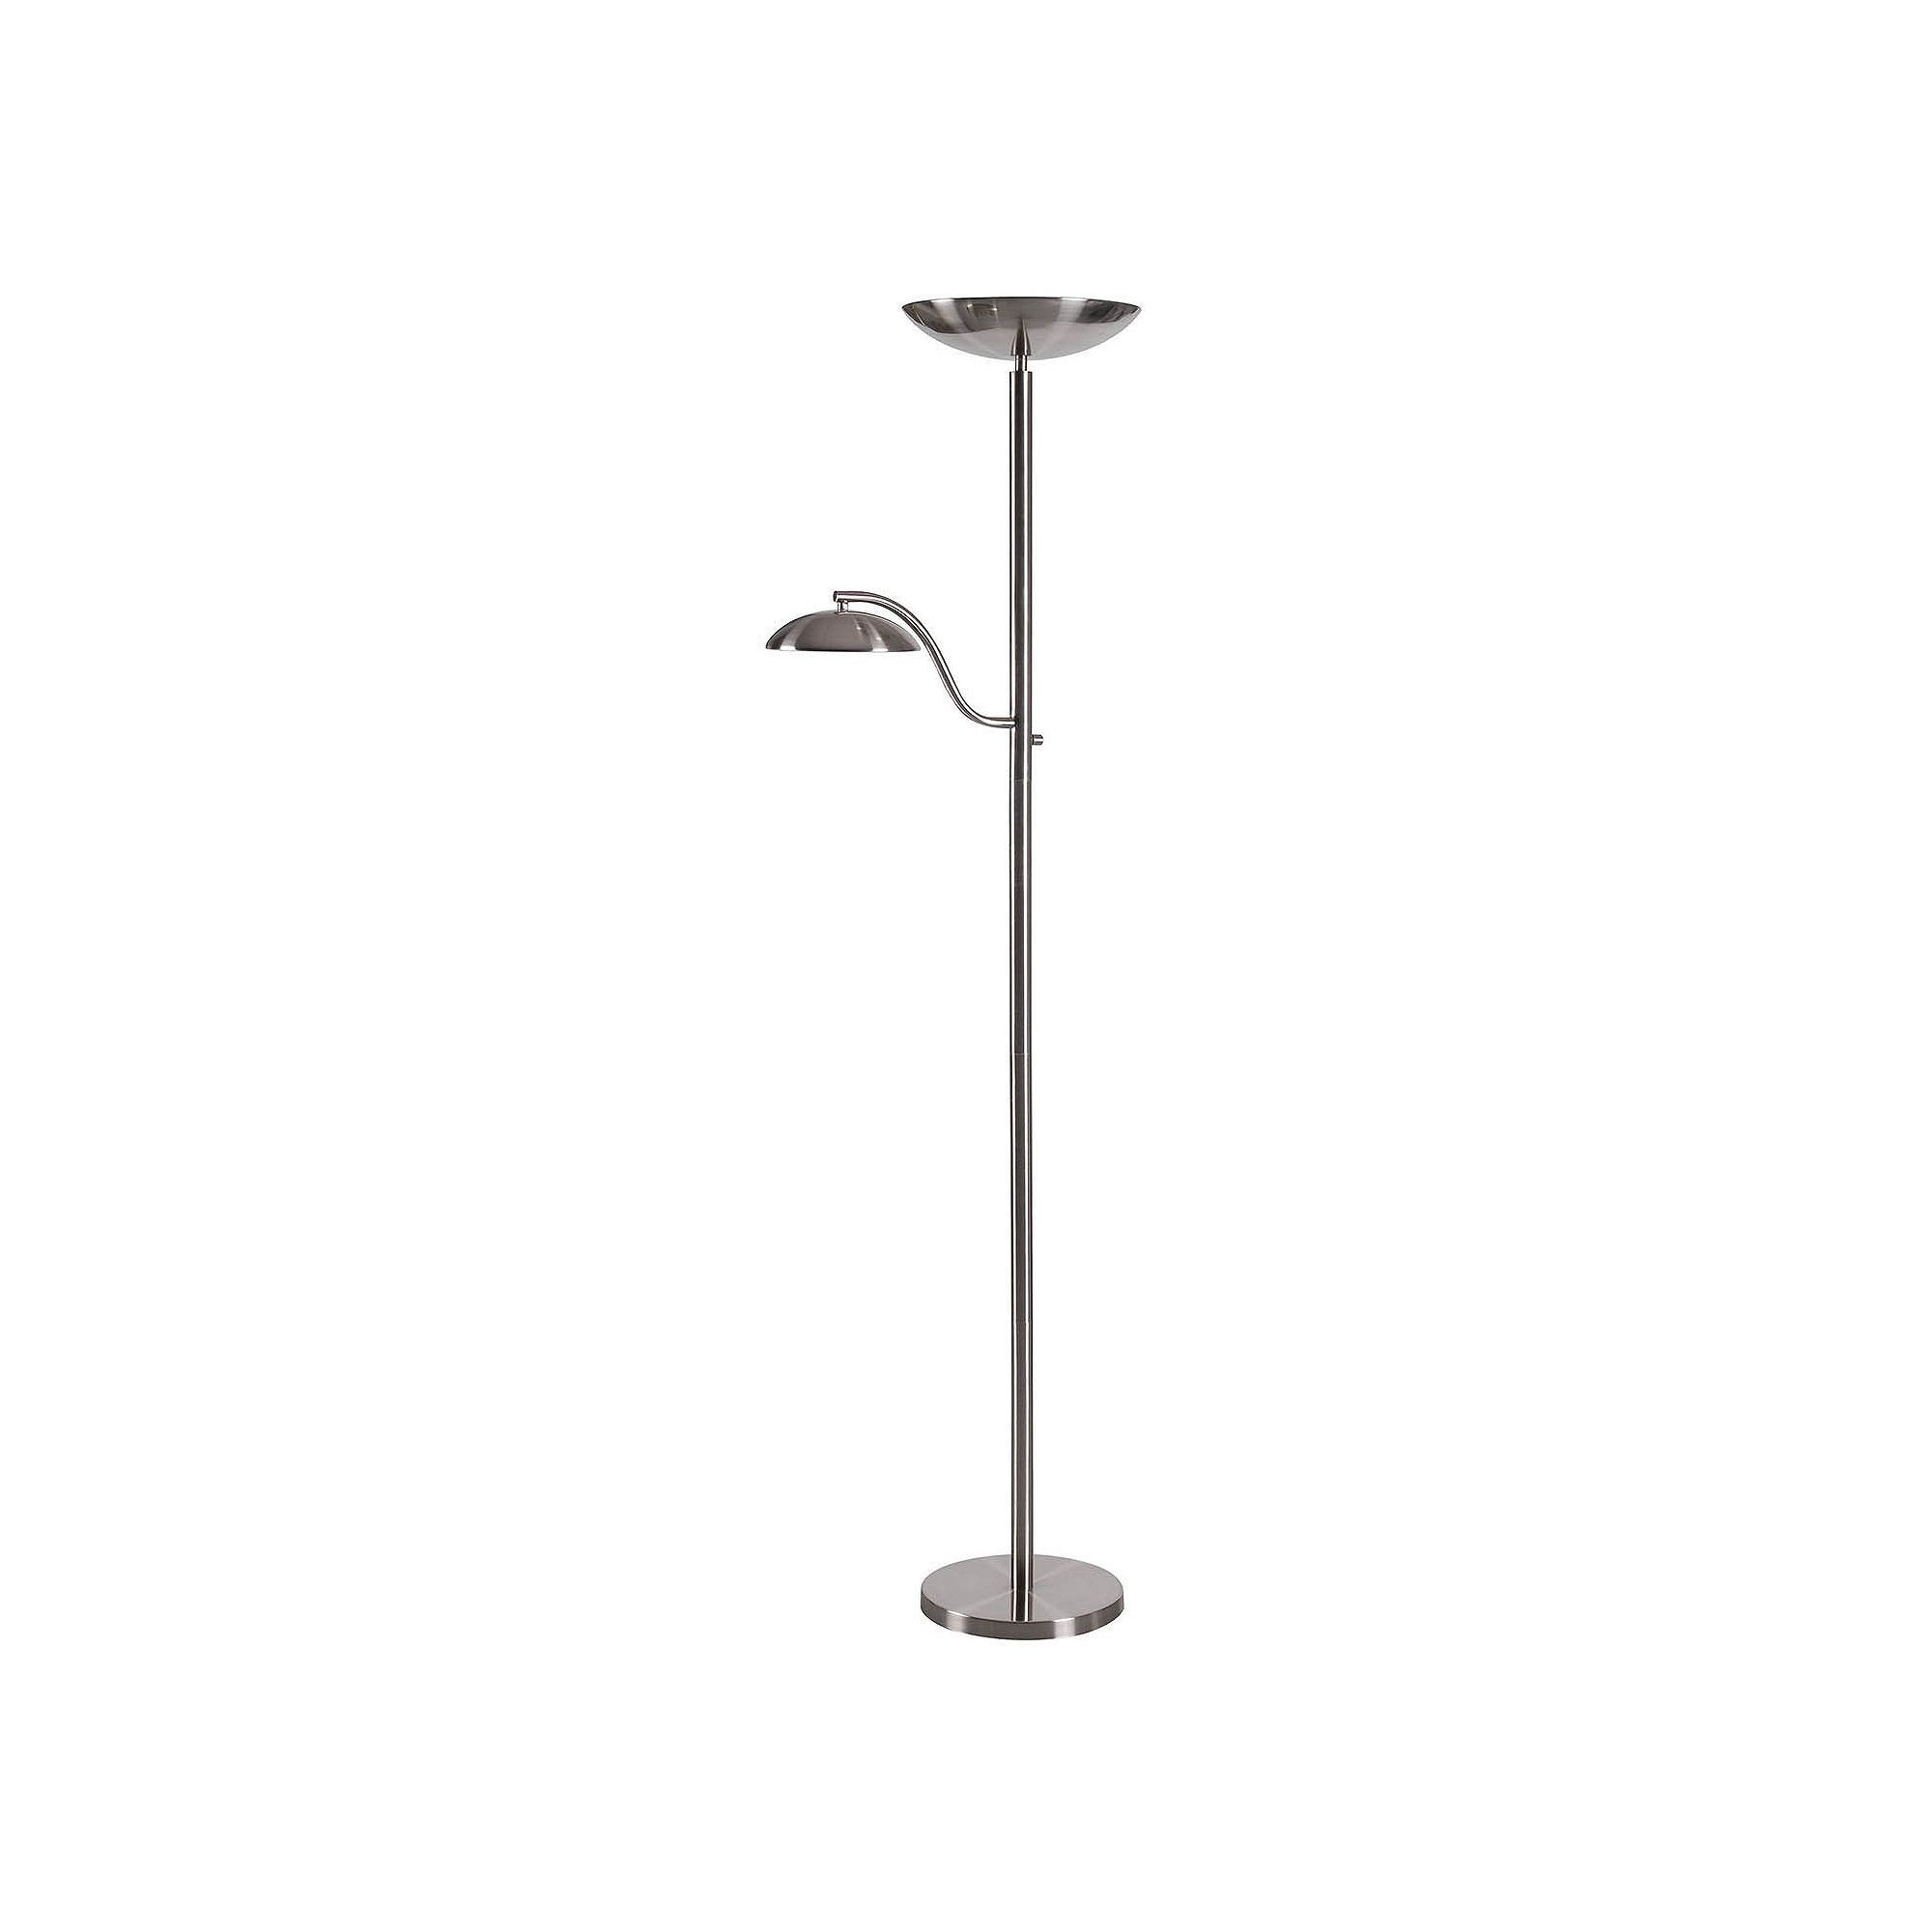 Kenroy Home Crescent 2 Light Torchiere Floor Lamp Grey for size 2000 X 2000